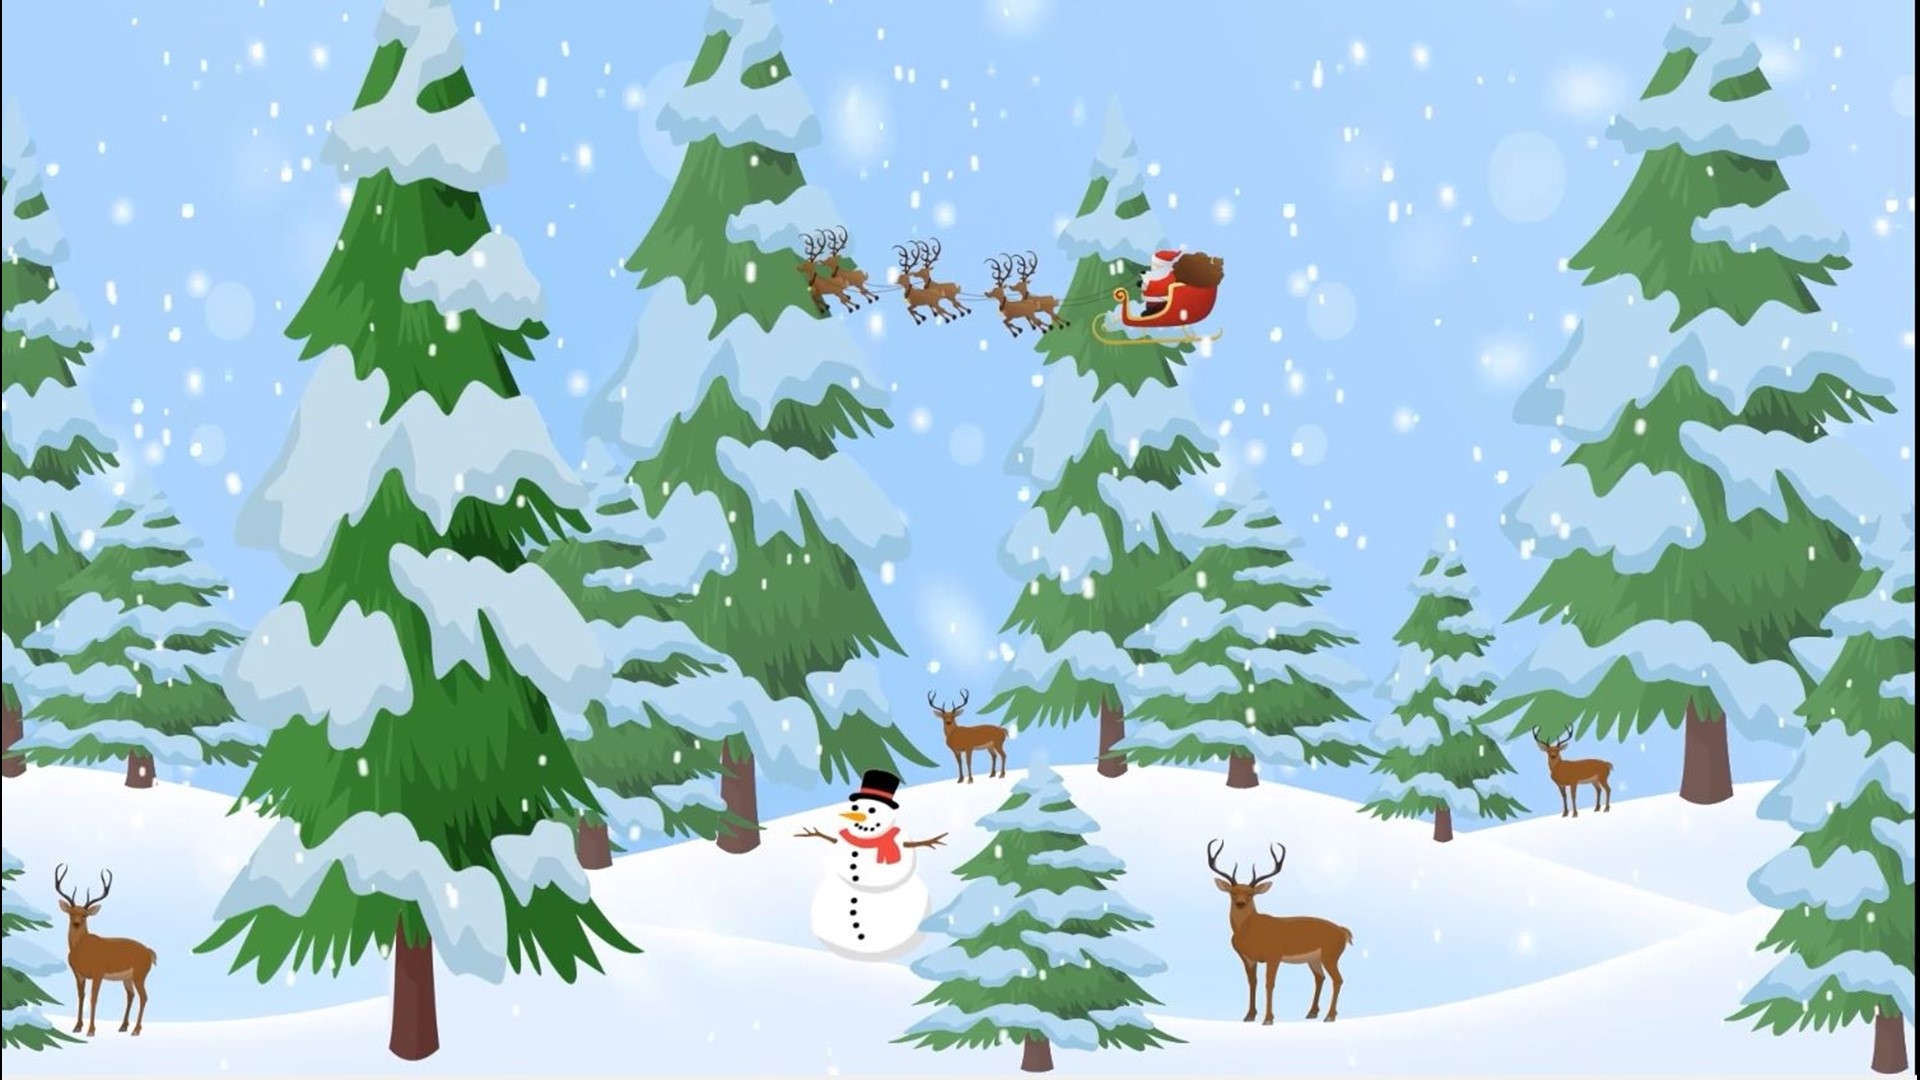 Santa and his reindeer are flying through a winter forest to deliver presents. Enjoy this video loop set to some festive music!